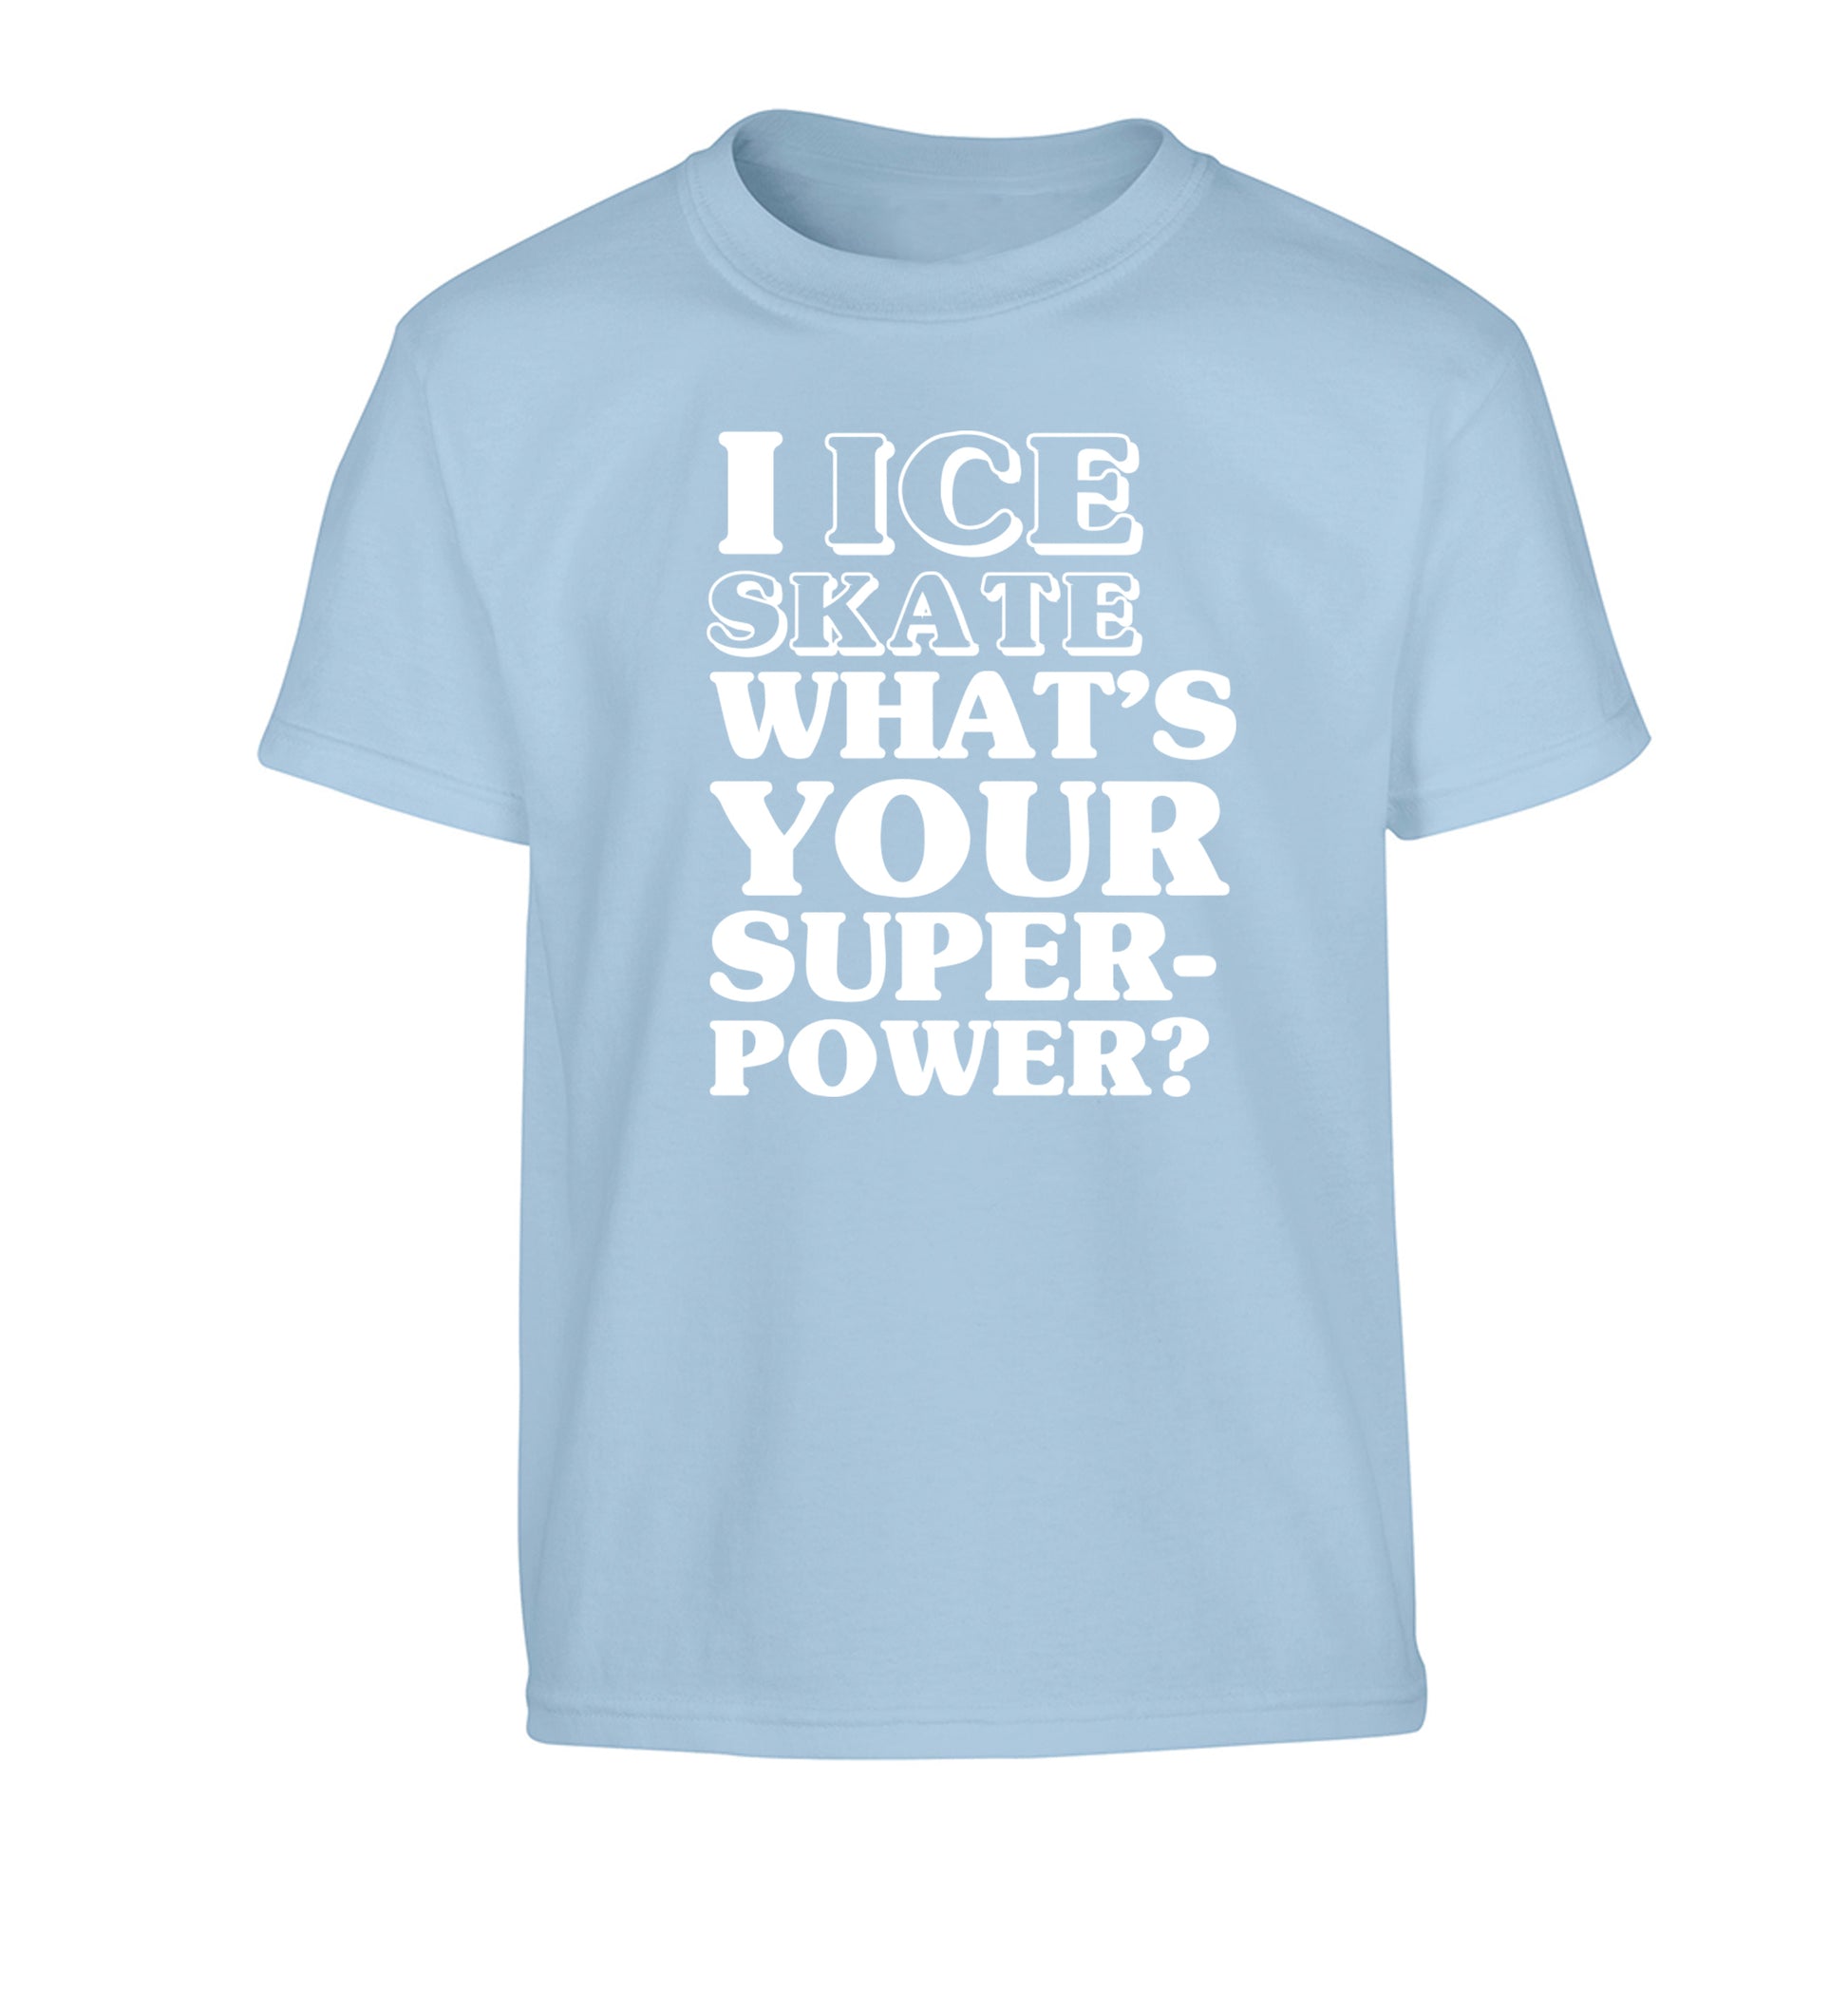 I ice skate what's your superpower? Children's light blue Tshirt 12-14 Years